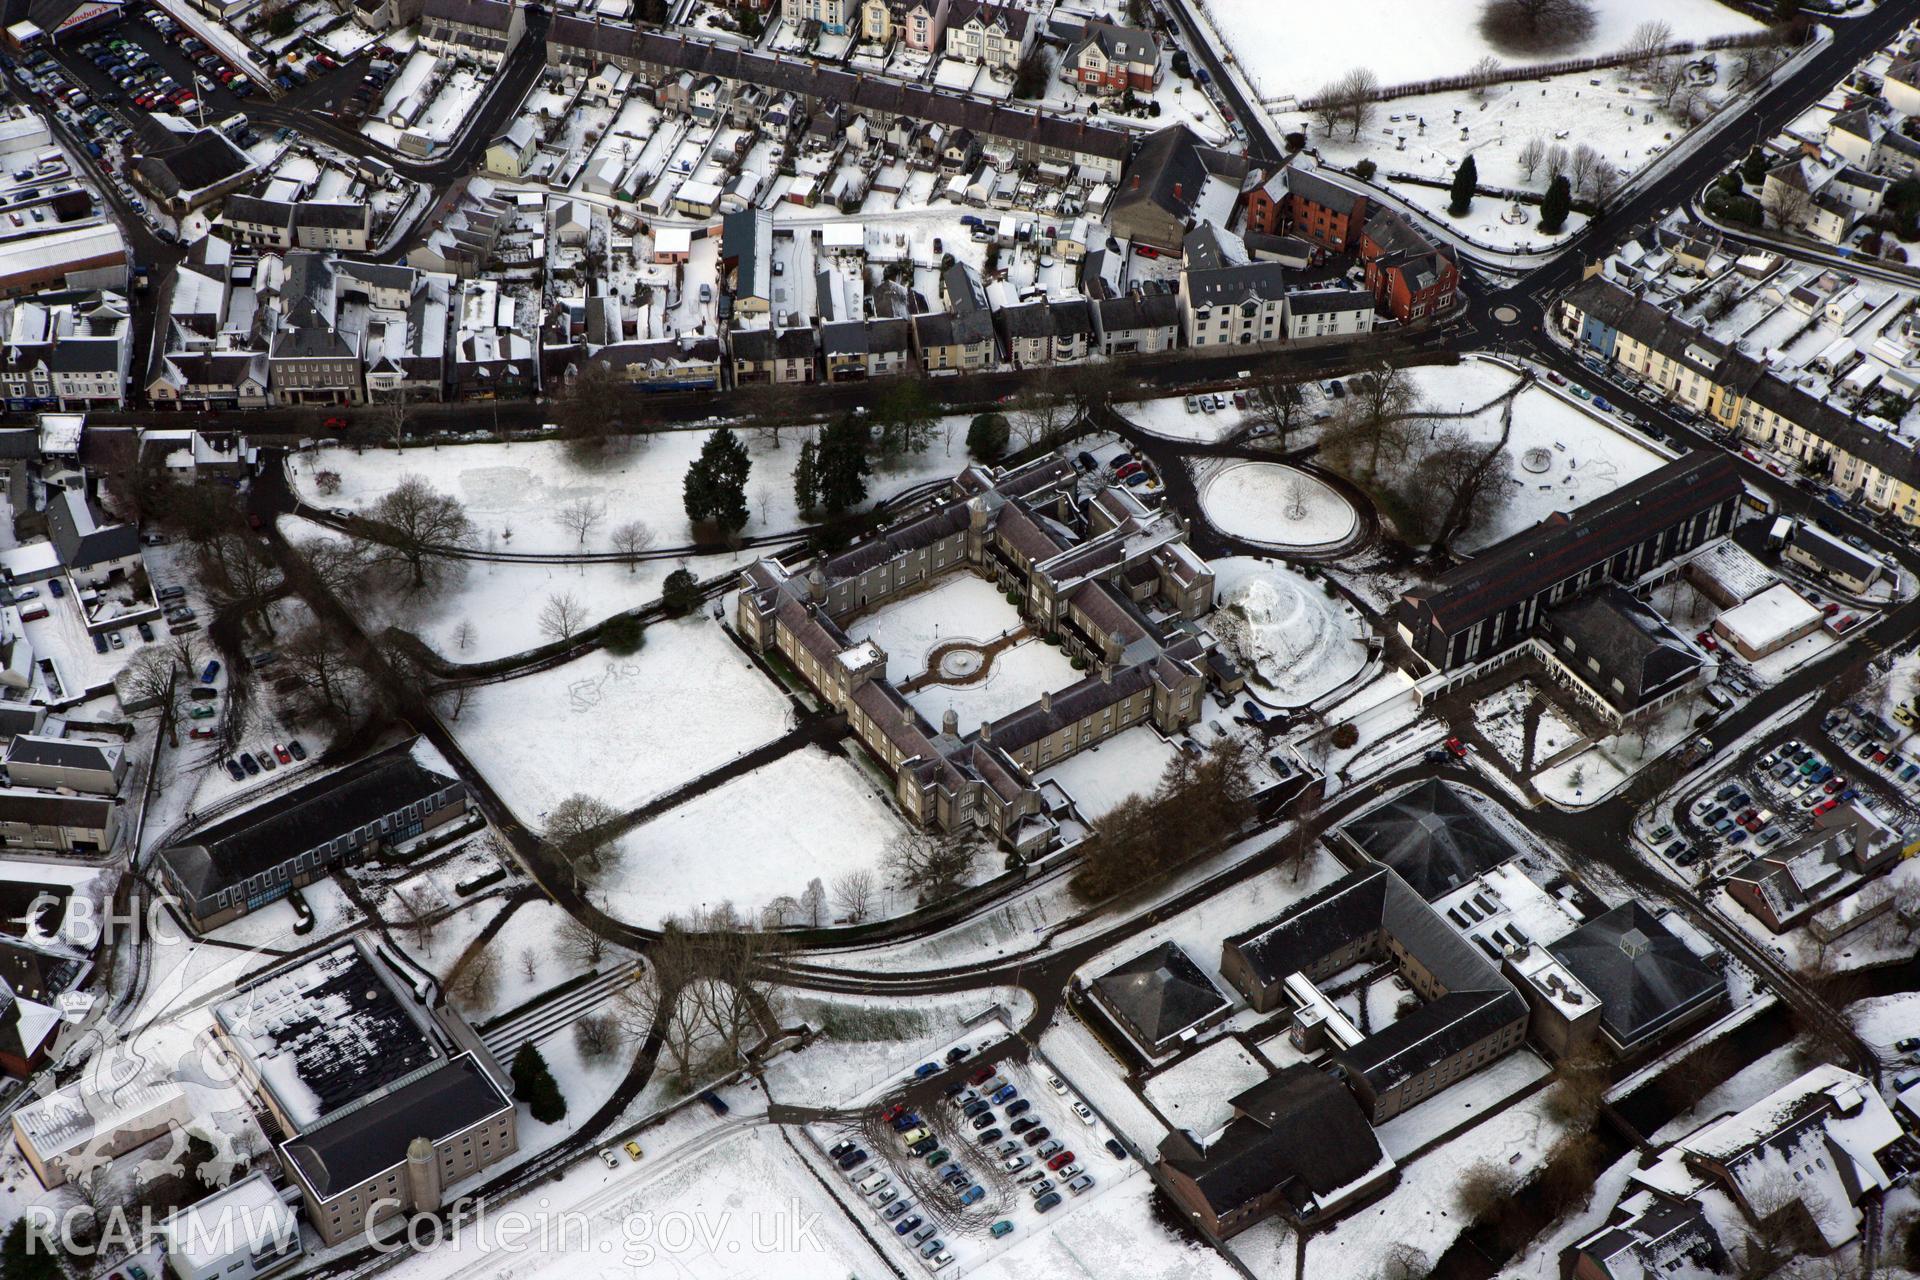 RCAHMW colour oblique aerial photograph of Lampeter under snow, by Toby Driver, 02/12/2010.